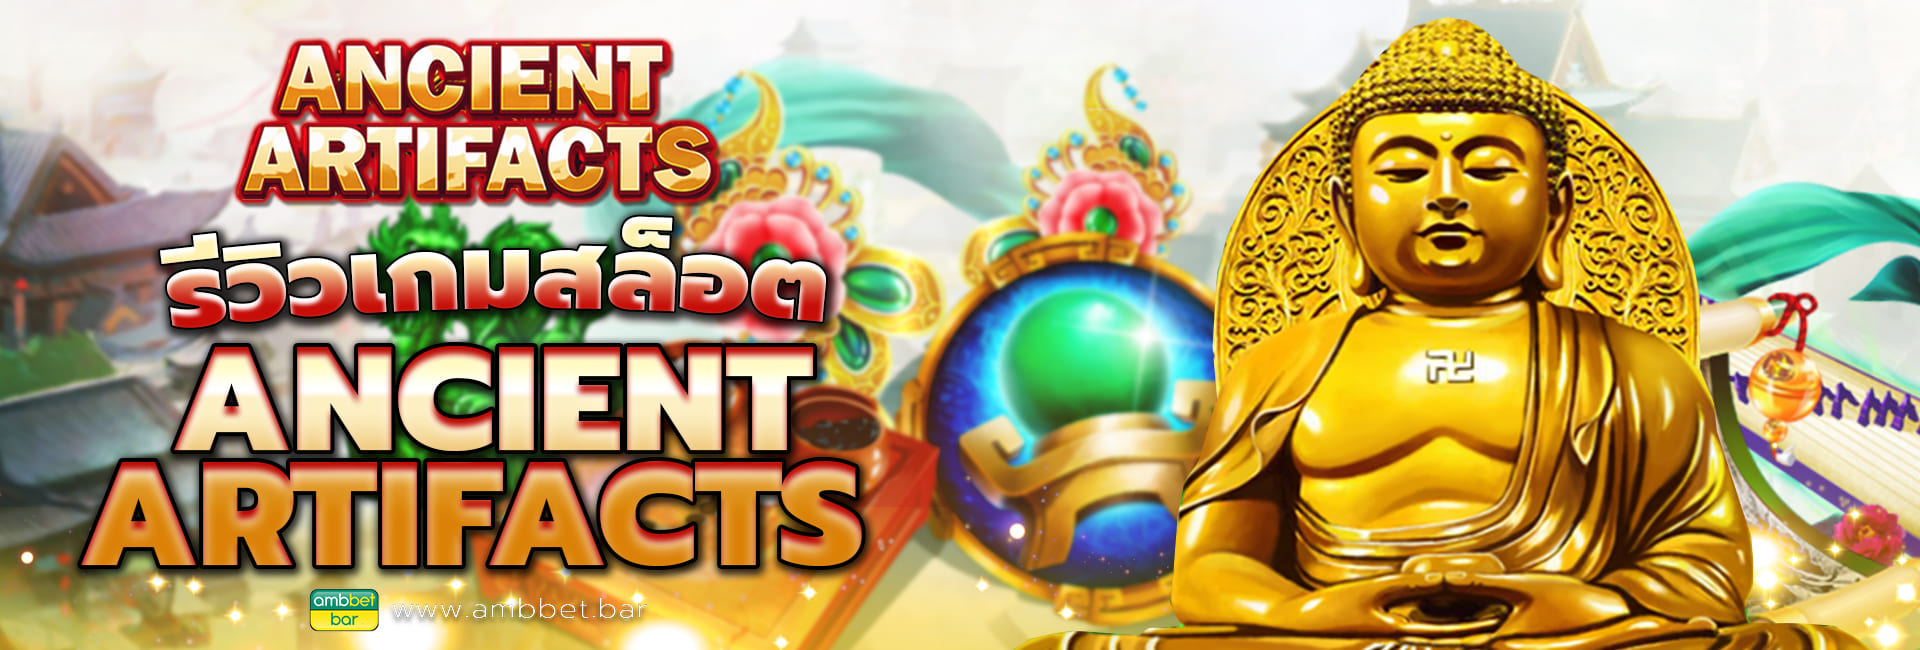 Ancient Artifacts banner